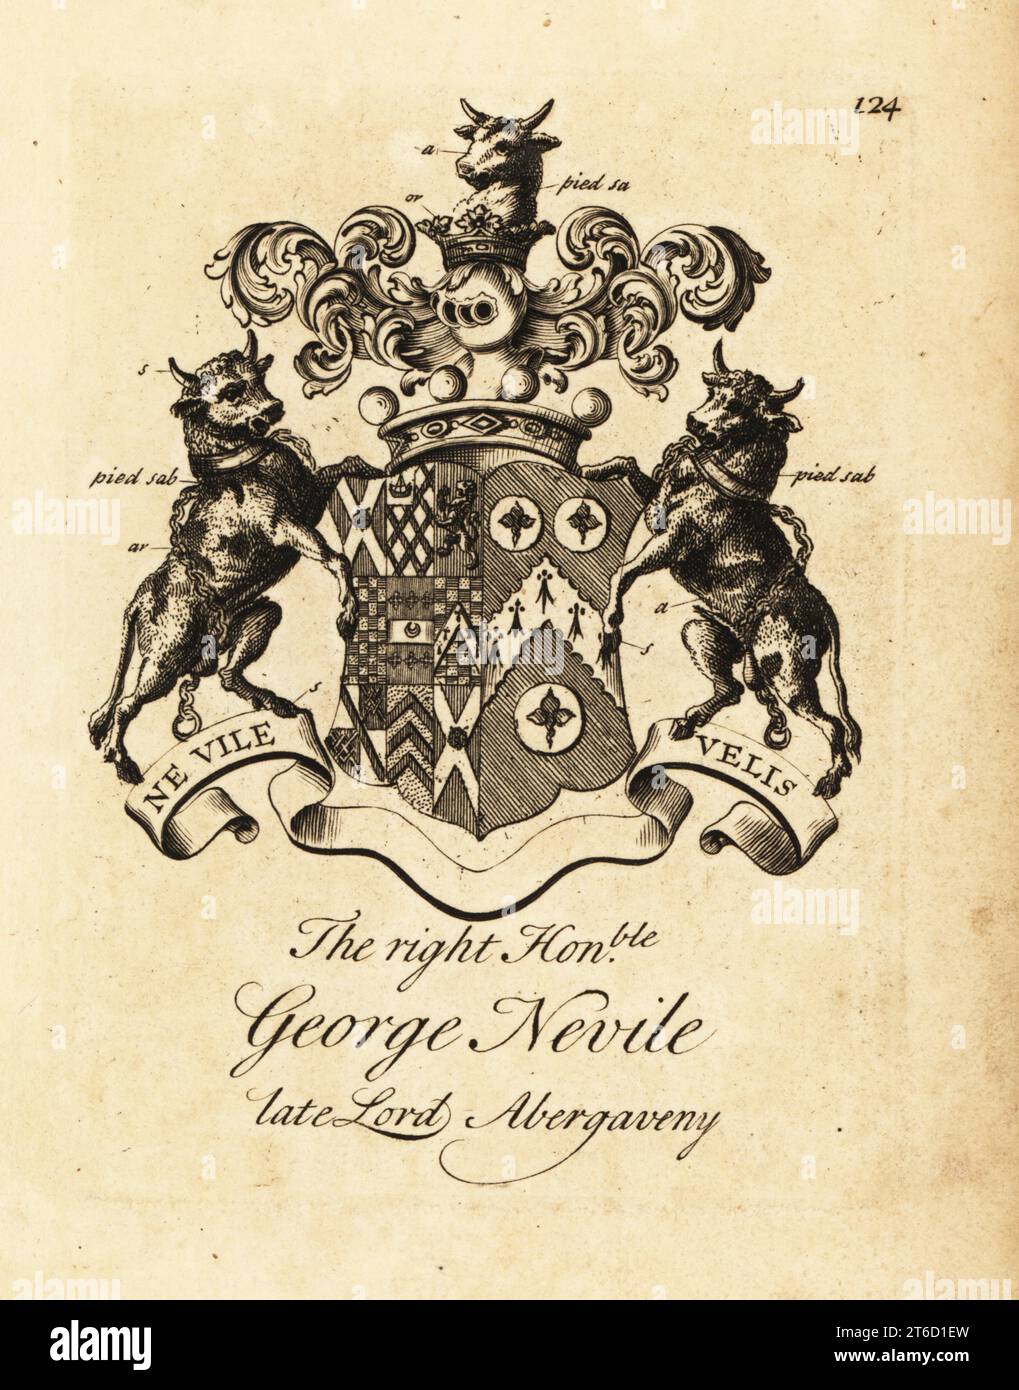 Coat of arms of the Right Honourable George Nevile, 1st Lord Abergaveny, 1727-1785. Copperplate engraving by Andrew Johnston after C. Gardiner from Notitia Anglicana, Shewing the Achievements of all the English Nobility, Andrew Johnson, the Strand, London, 1724. Stock Photo